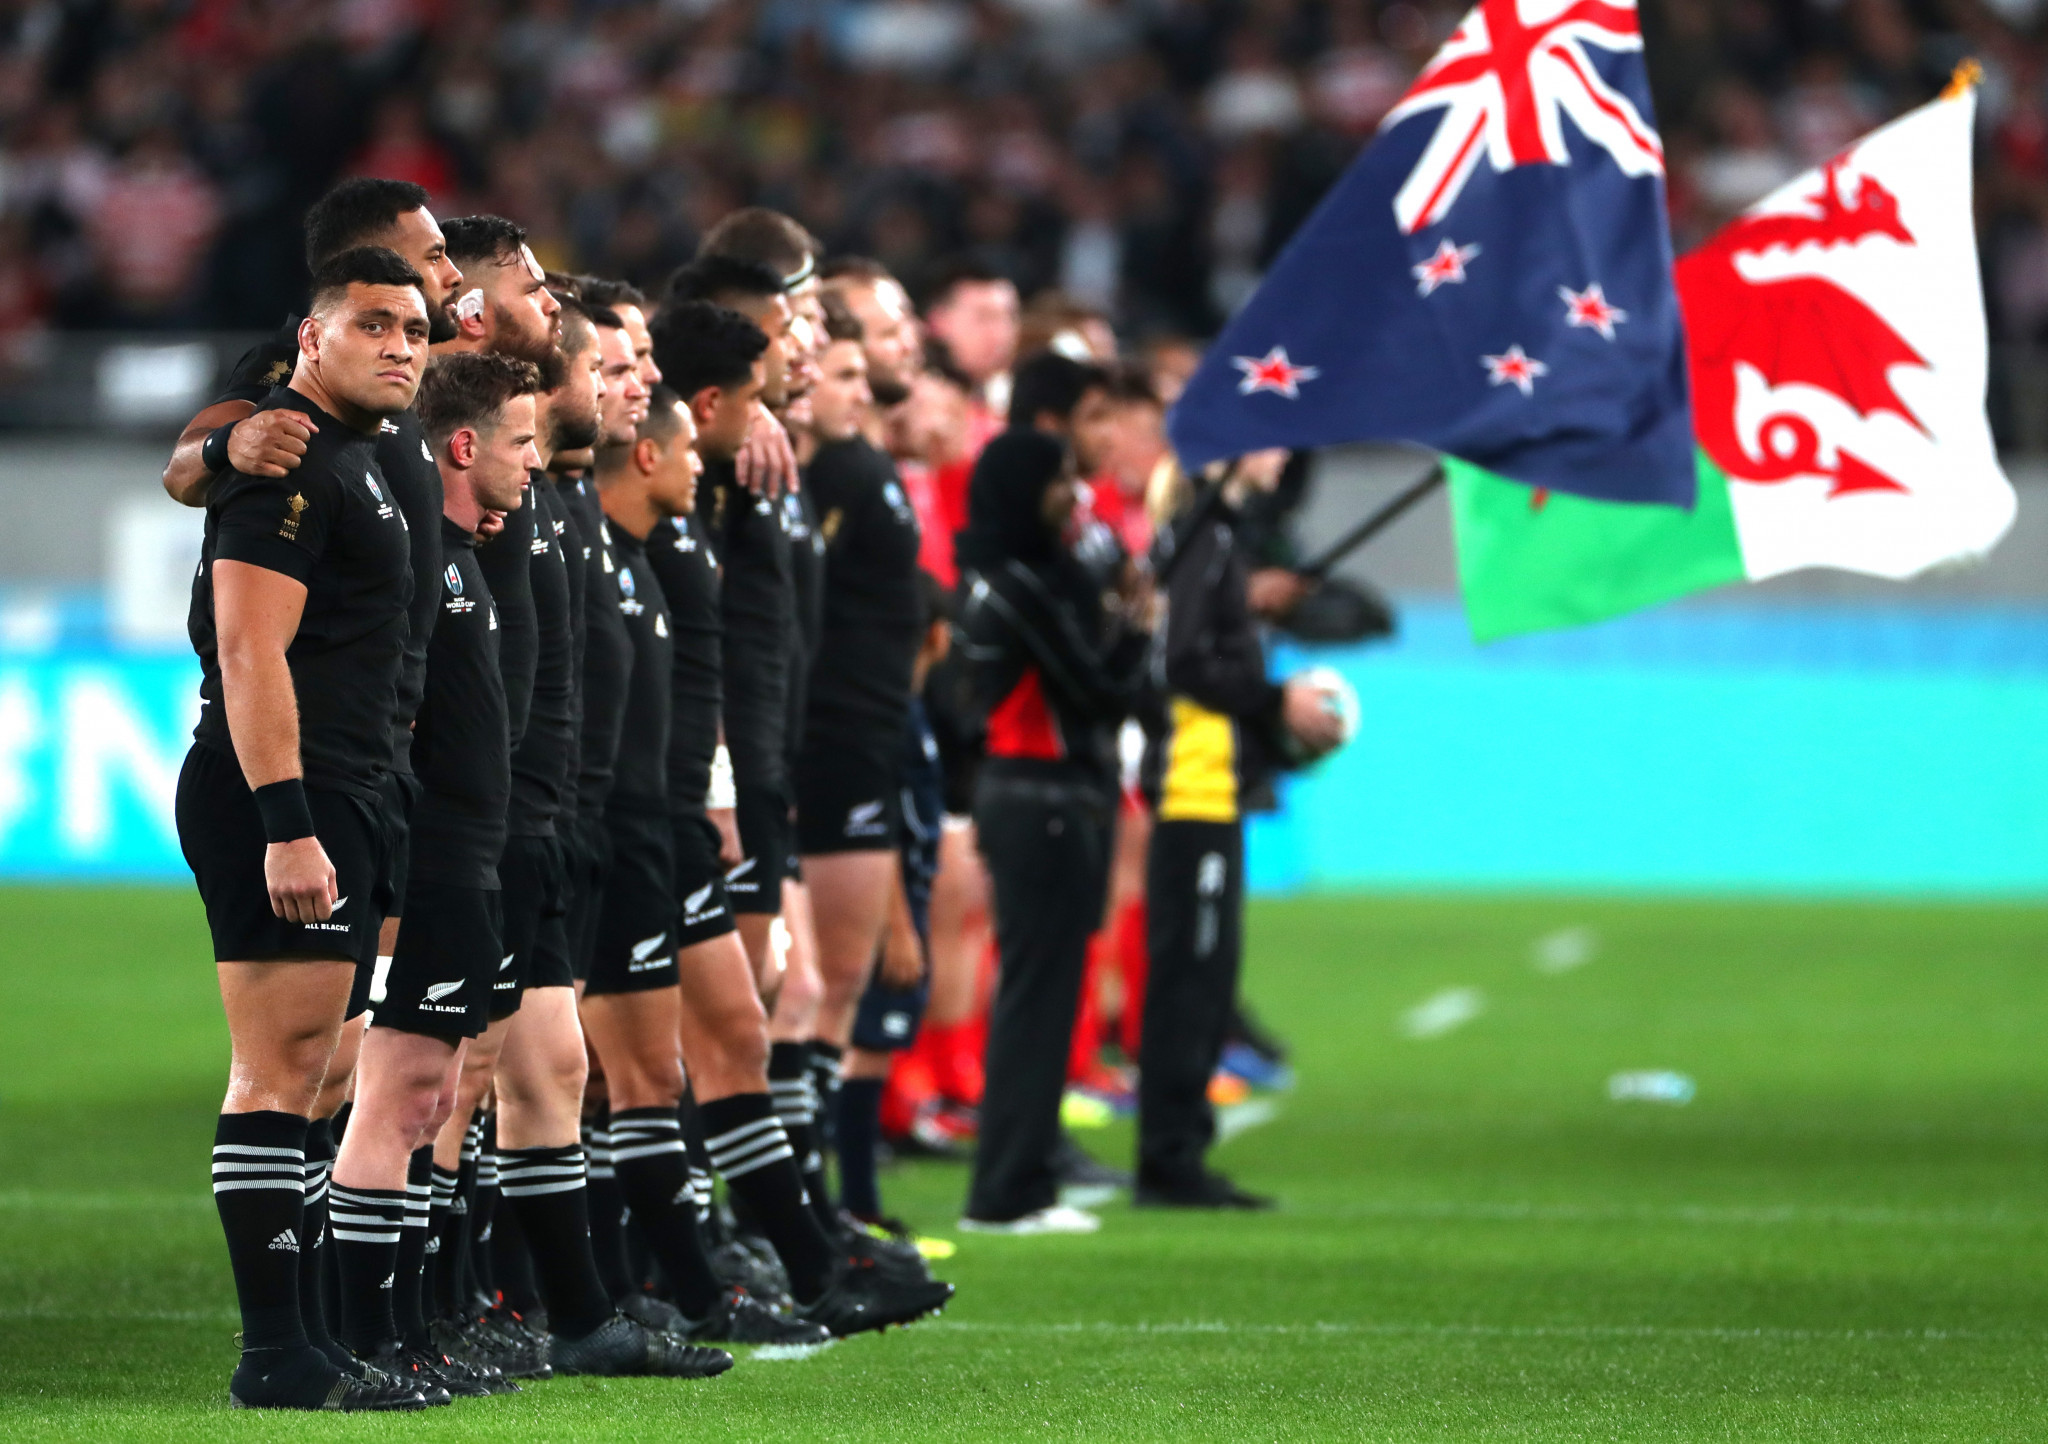 Reports claim up to half of New Zealand Rugby staff are set to be made redundant due to the financial pressures of the coronavirus pandemic ©Getty Images